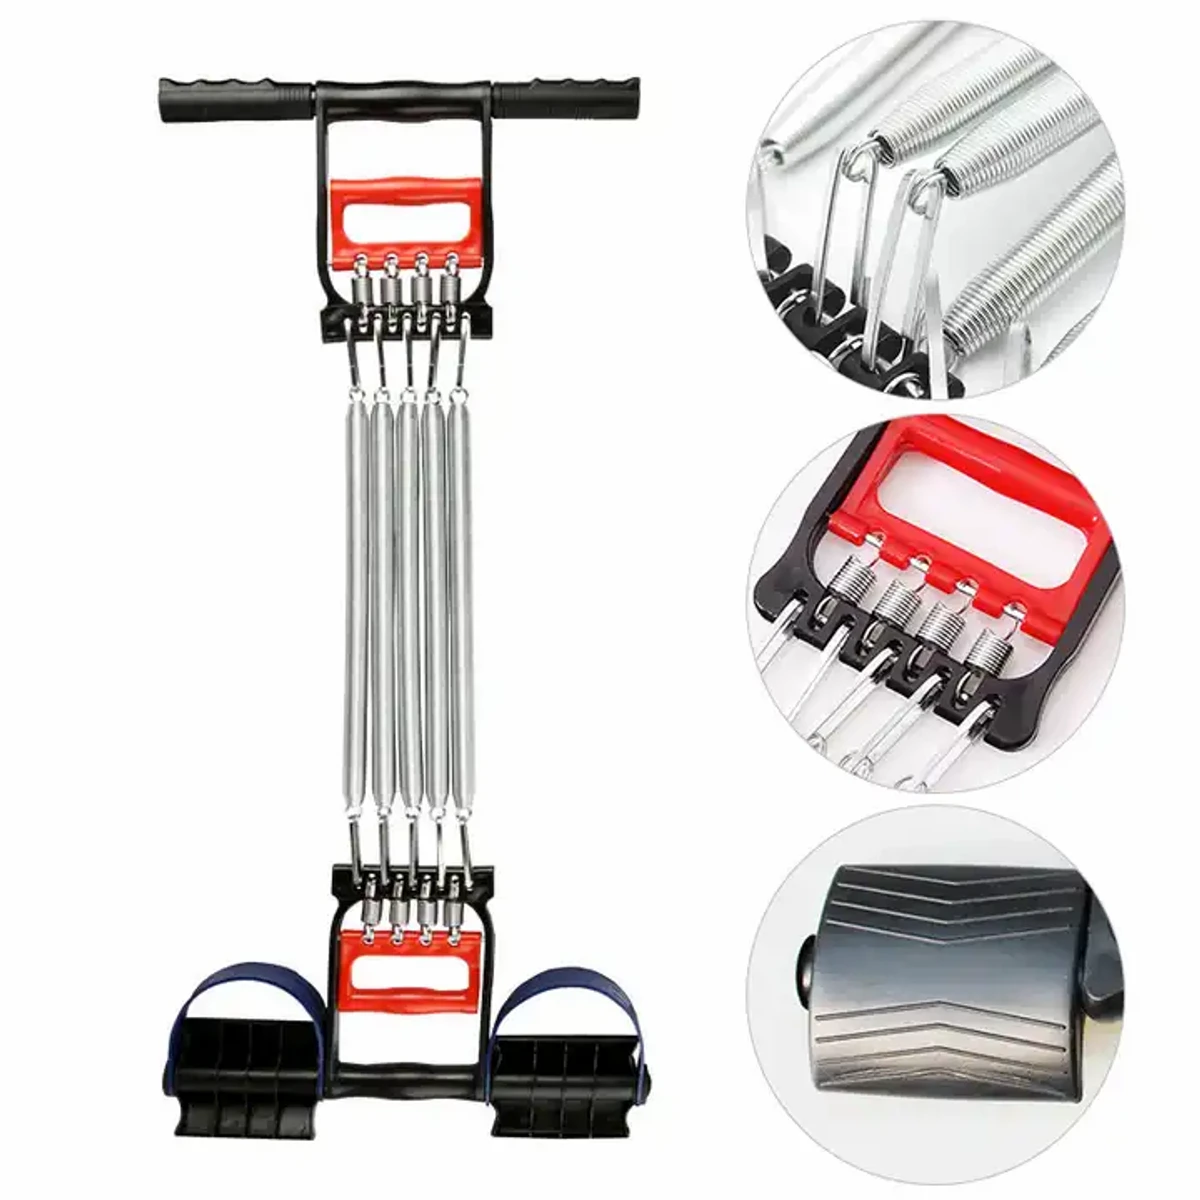 5 Spring -Multi Function Chest Pull Expander